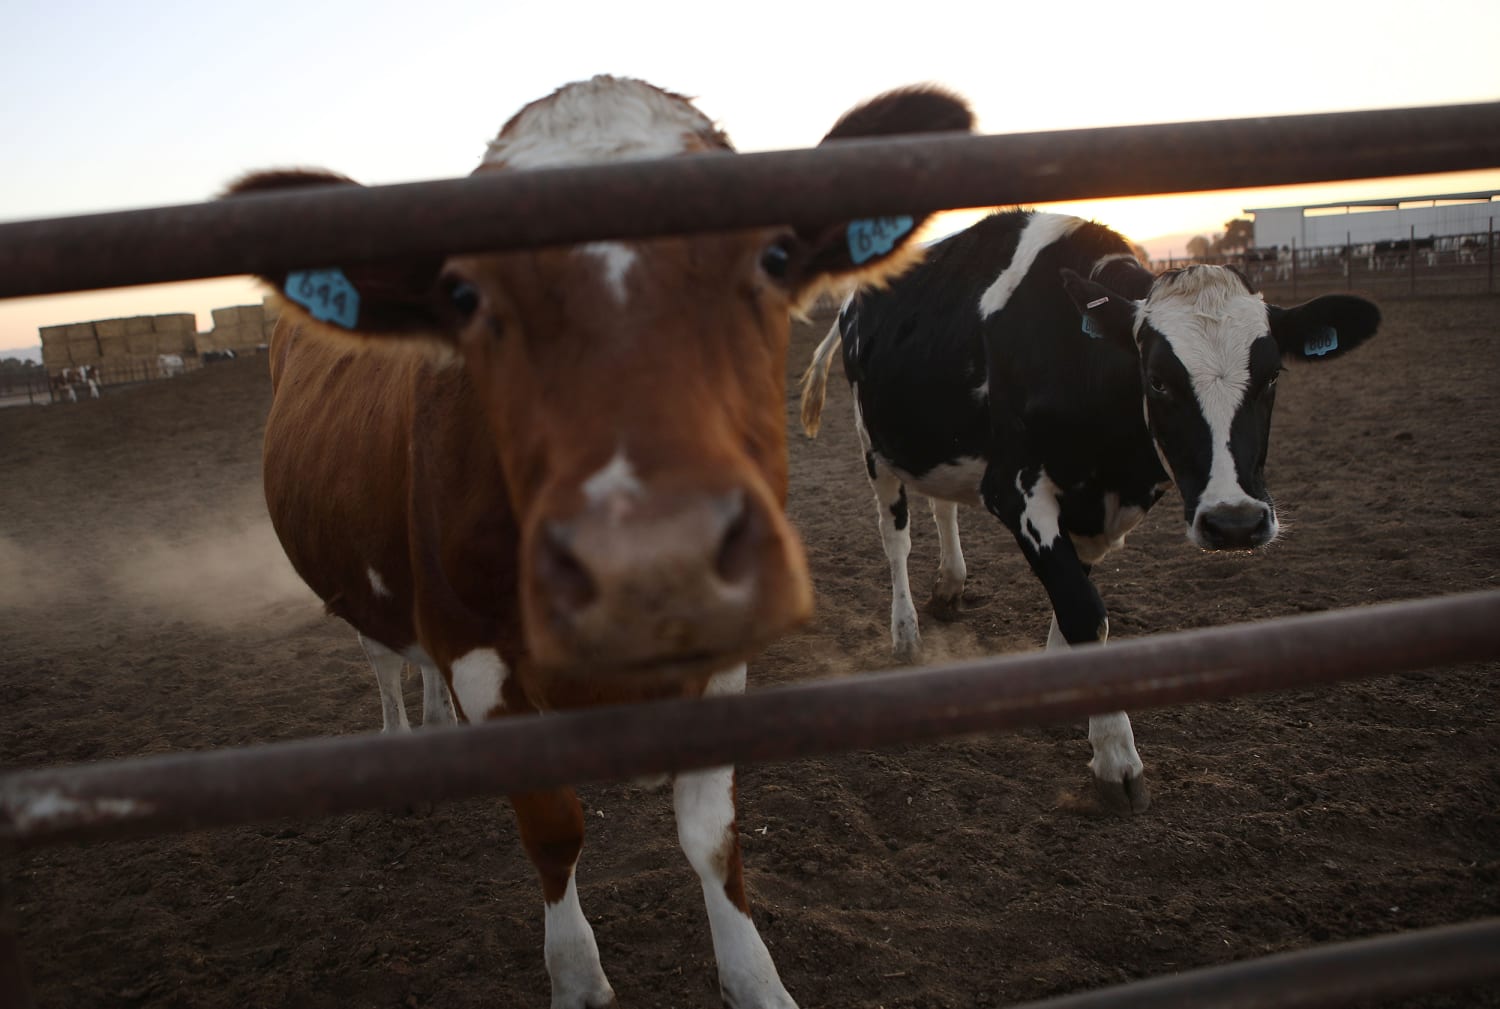 Fda Approves Drug To Make Cow Manure Less Stinky